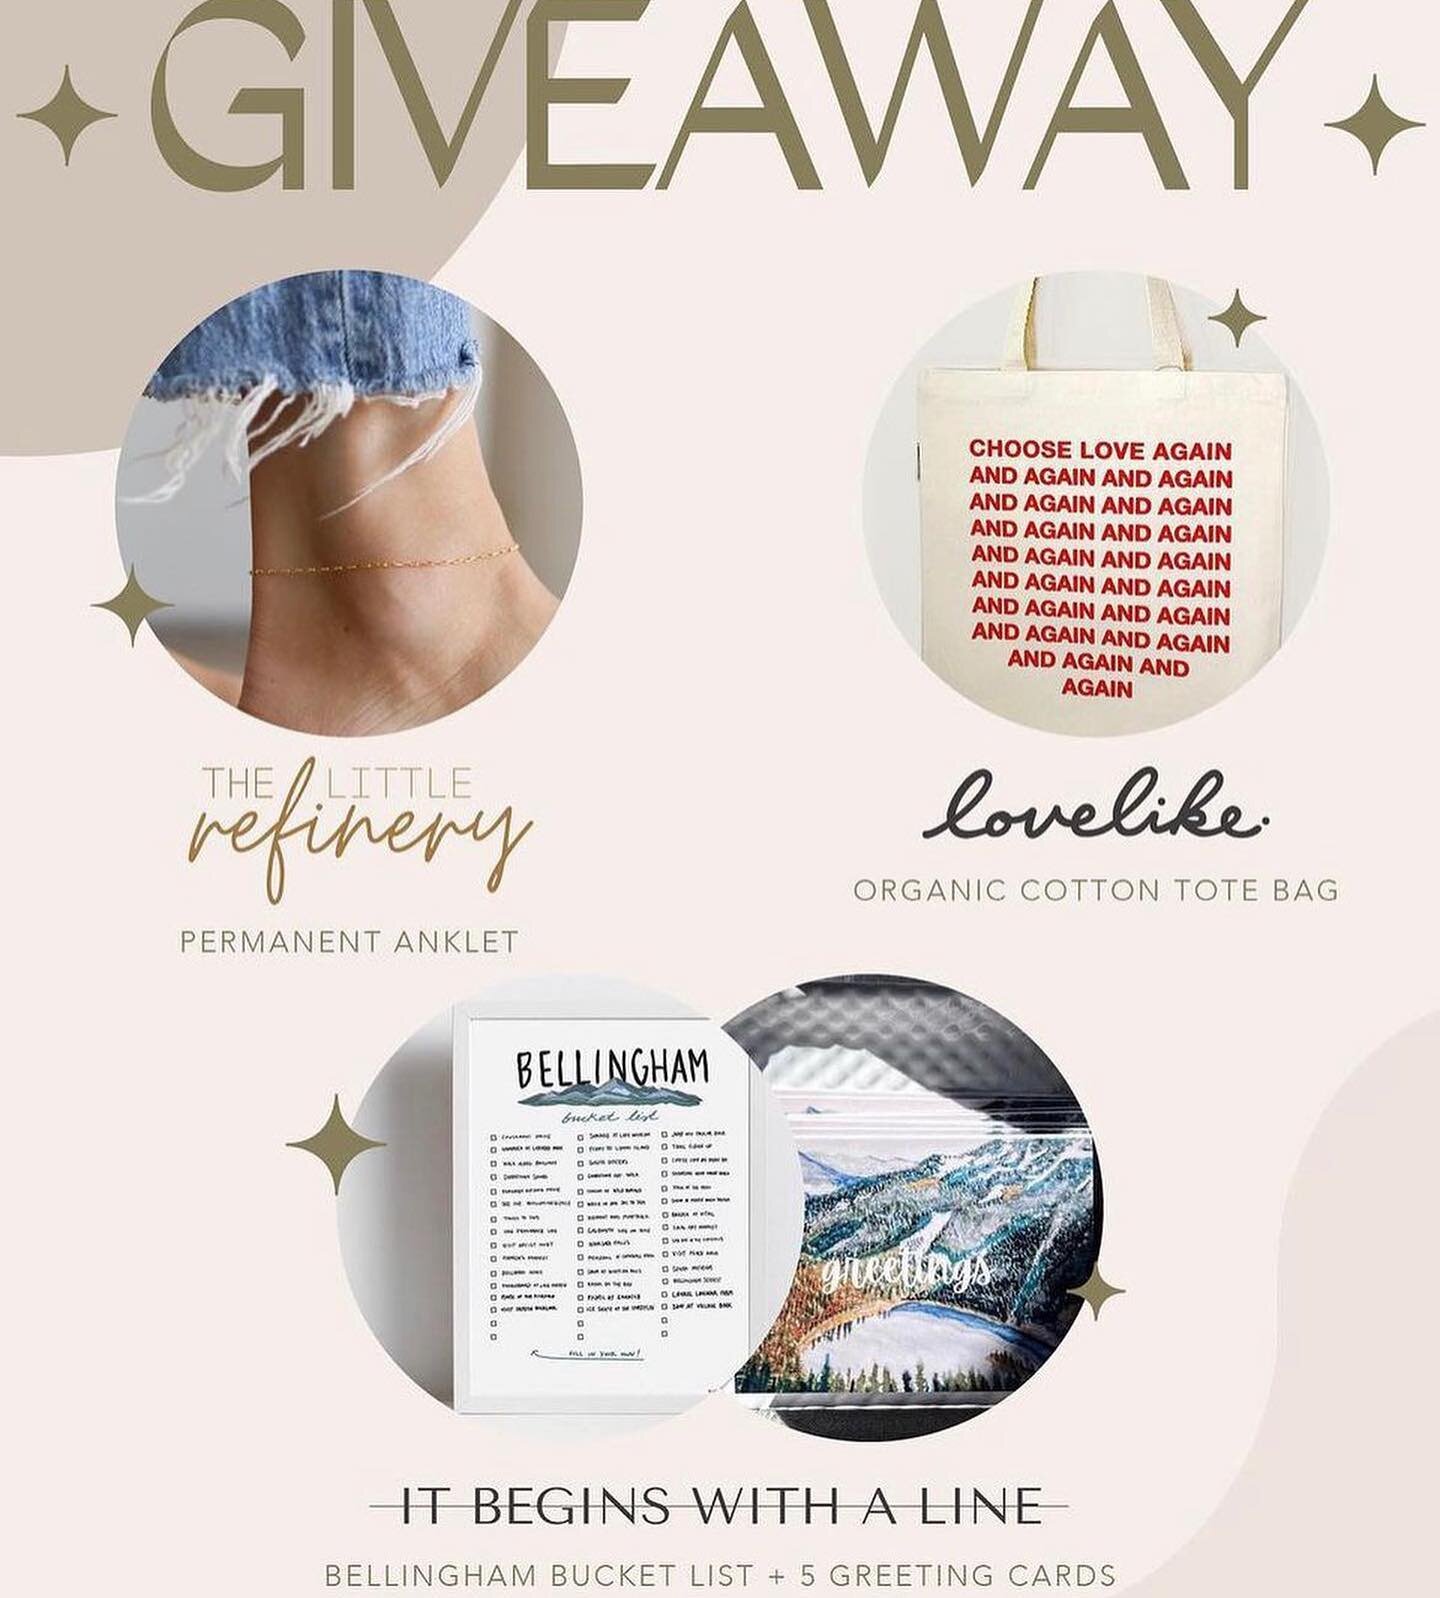 💫GIVEAWAY!💫 We&rsquo;re so excited for our popup next week that we&rsquo;re starting the fun early! Help us spread the word and enter to win these amazing maker-made items in the process 🥳

-���Follow @shoplovelike  @TheLittleRefinery &amp; @ItBeg